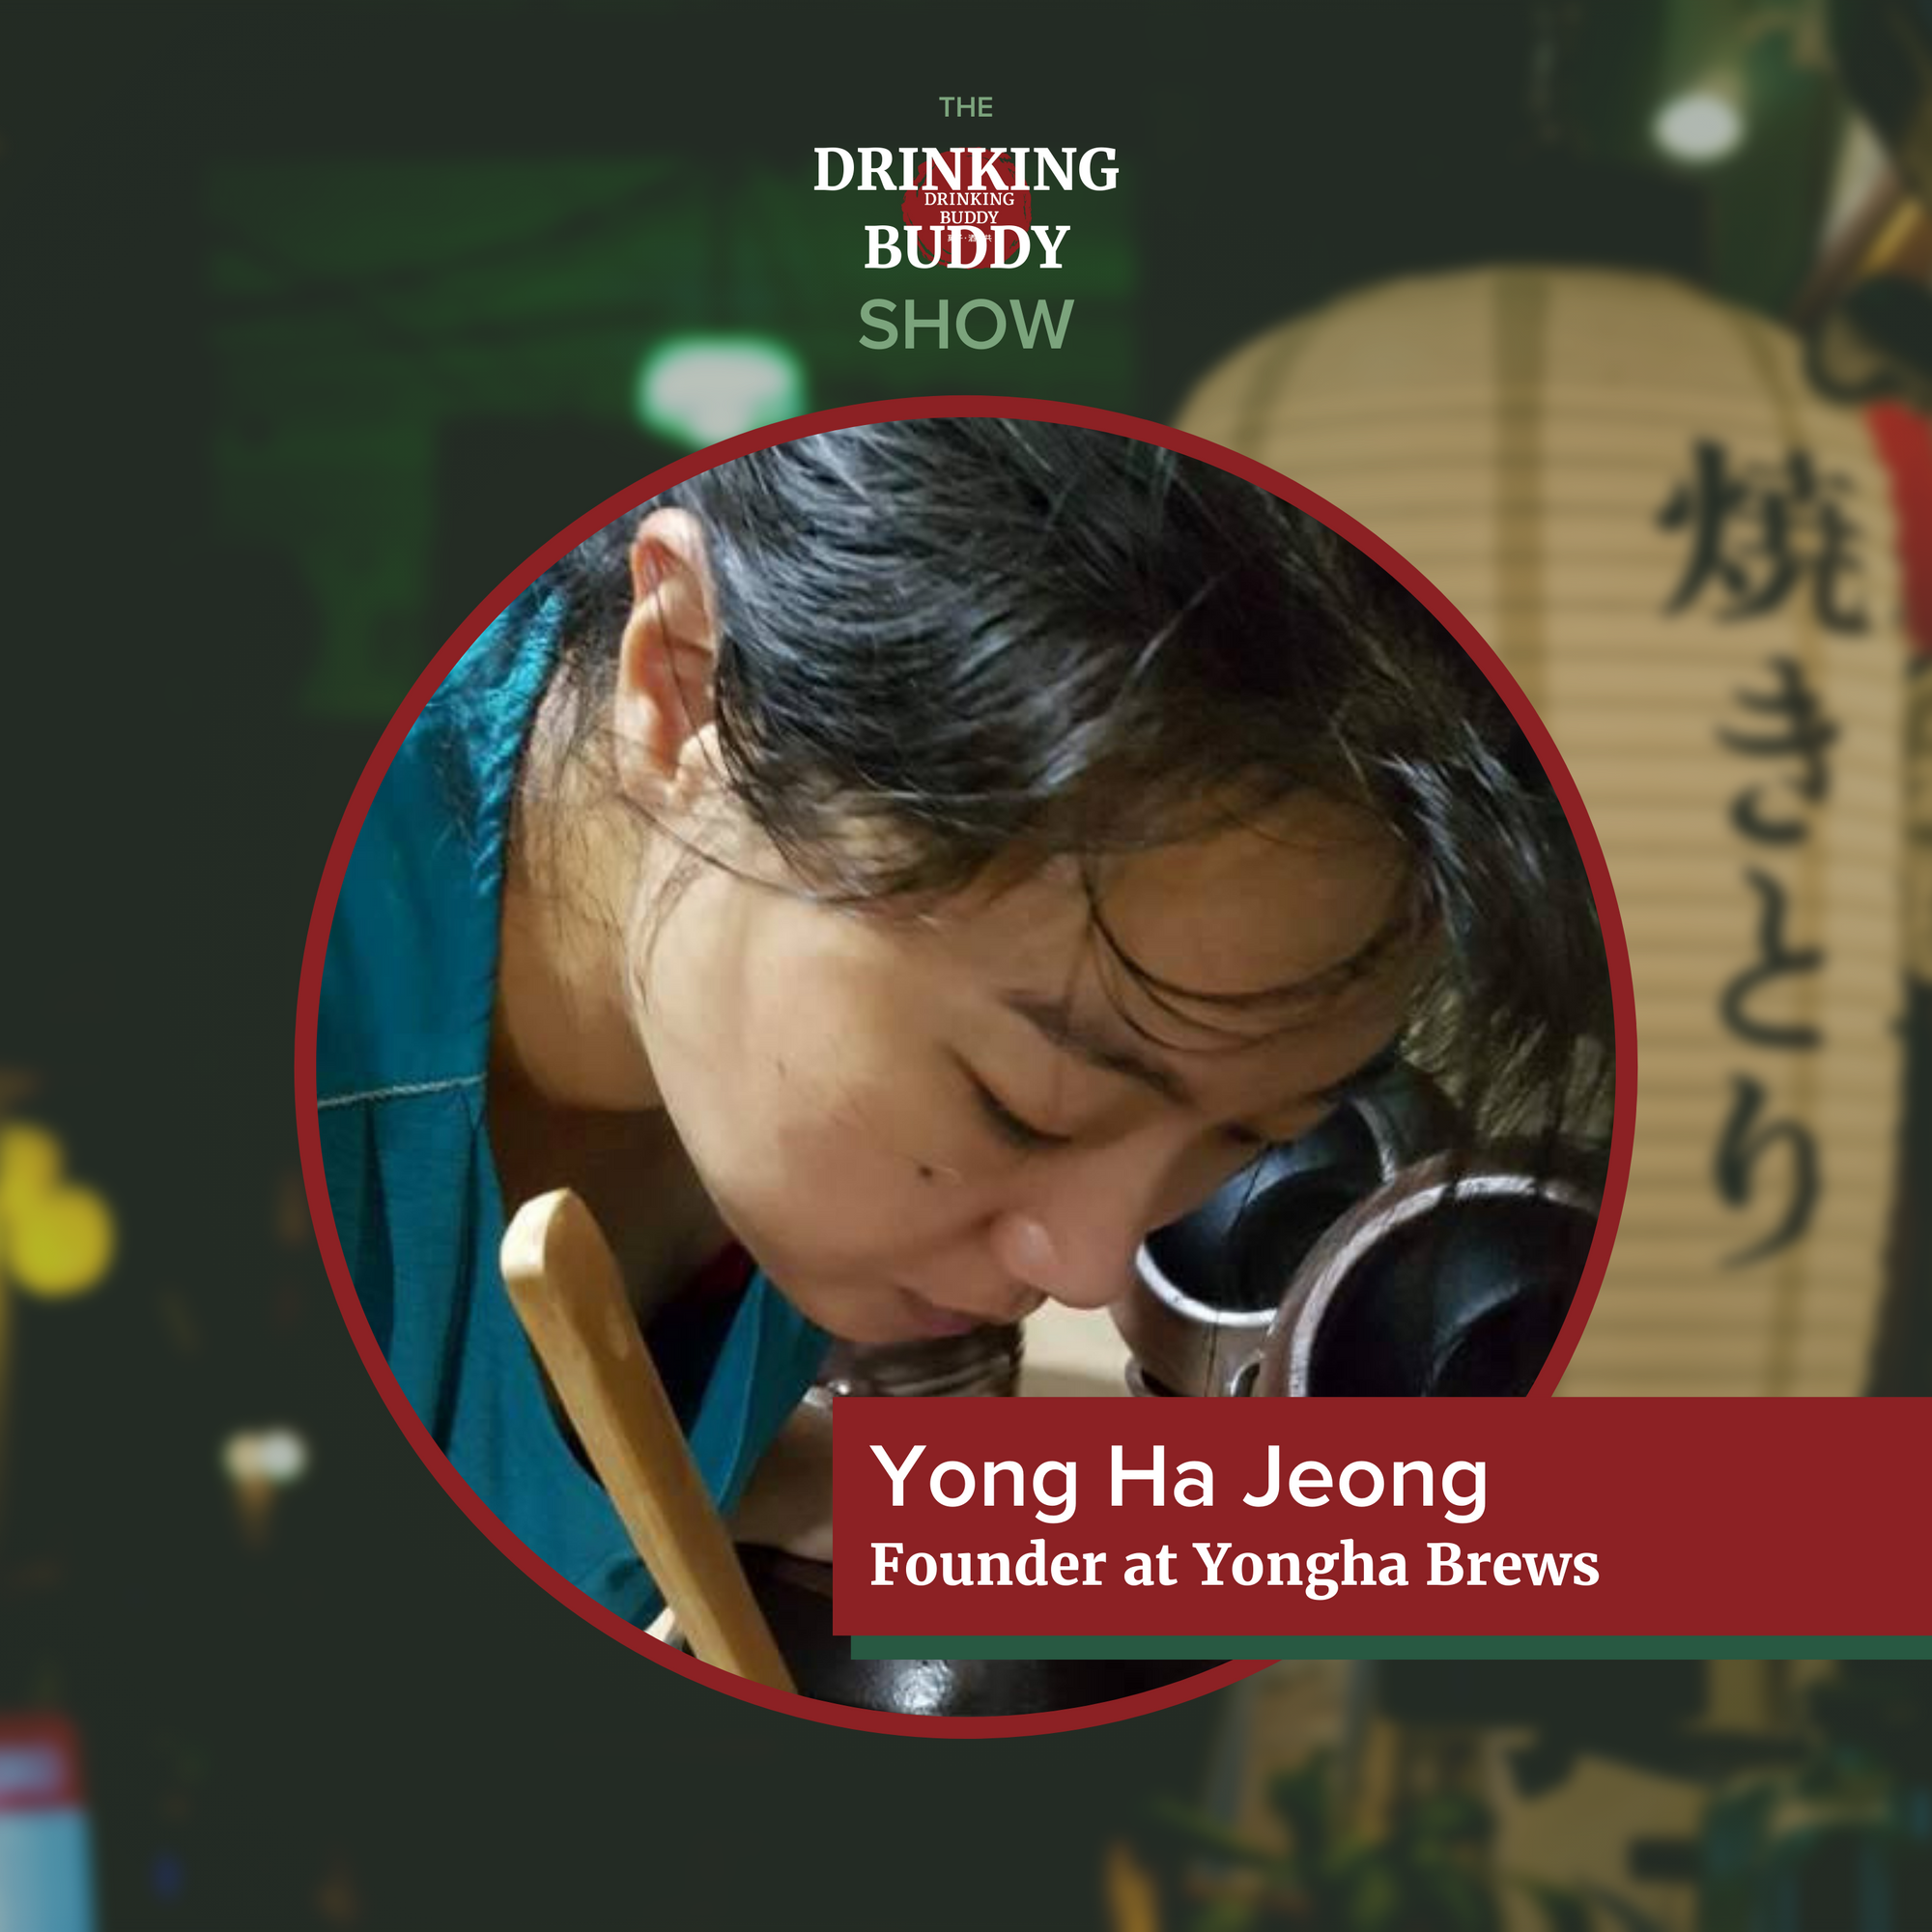 The Drinking Buddy Show Episode 9: The Underground History of Korean Alcohol Brewing with Yong Ha Jeong, Founder of Yongha Brews